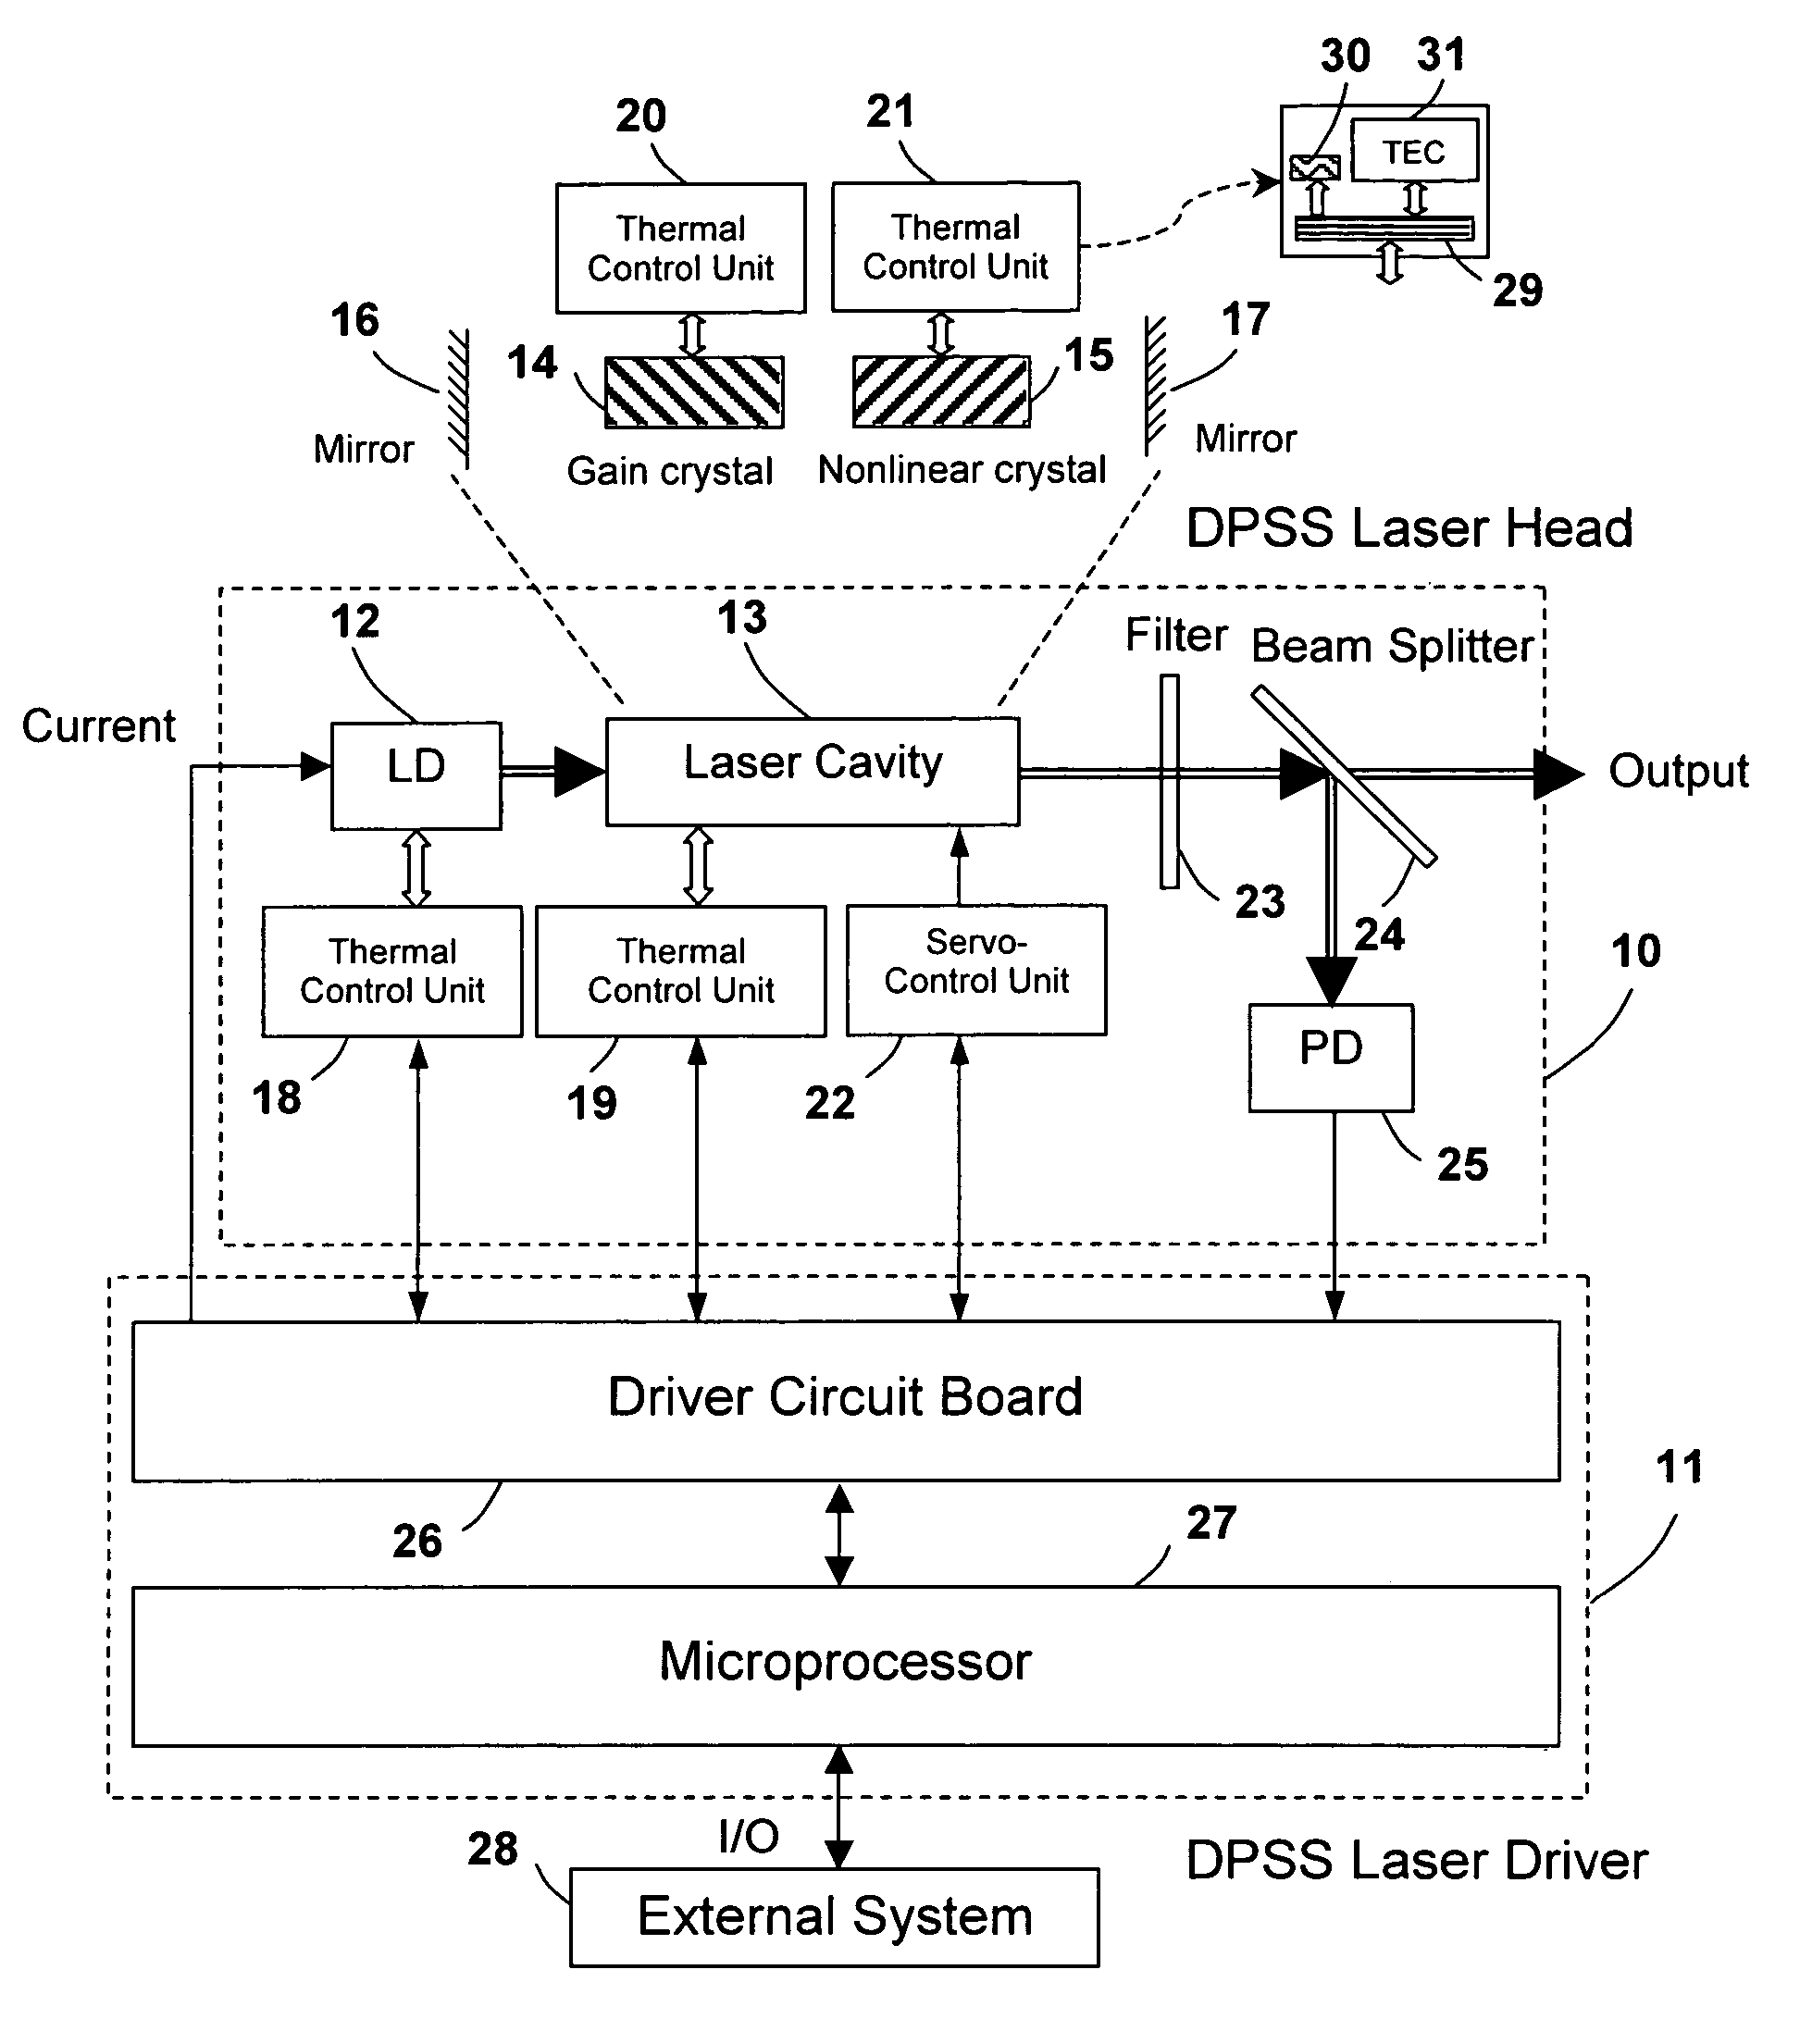 Diode-pumped solid-state laser with self-maintained multi-dimensional optimization